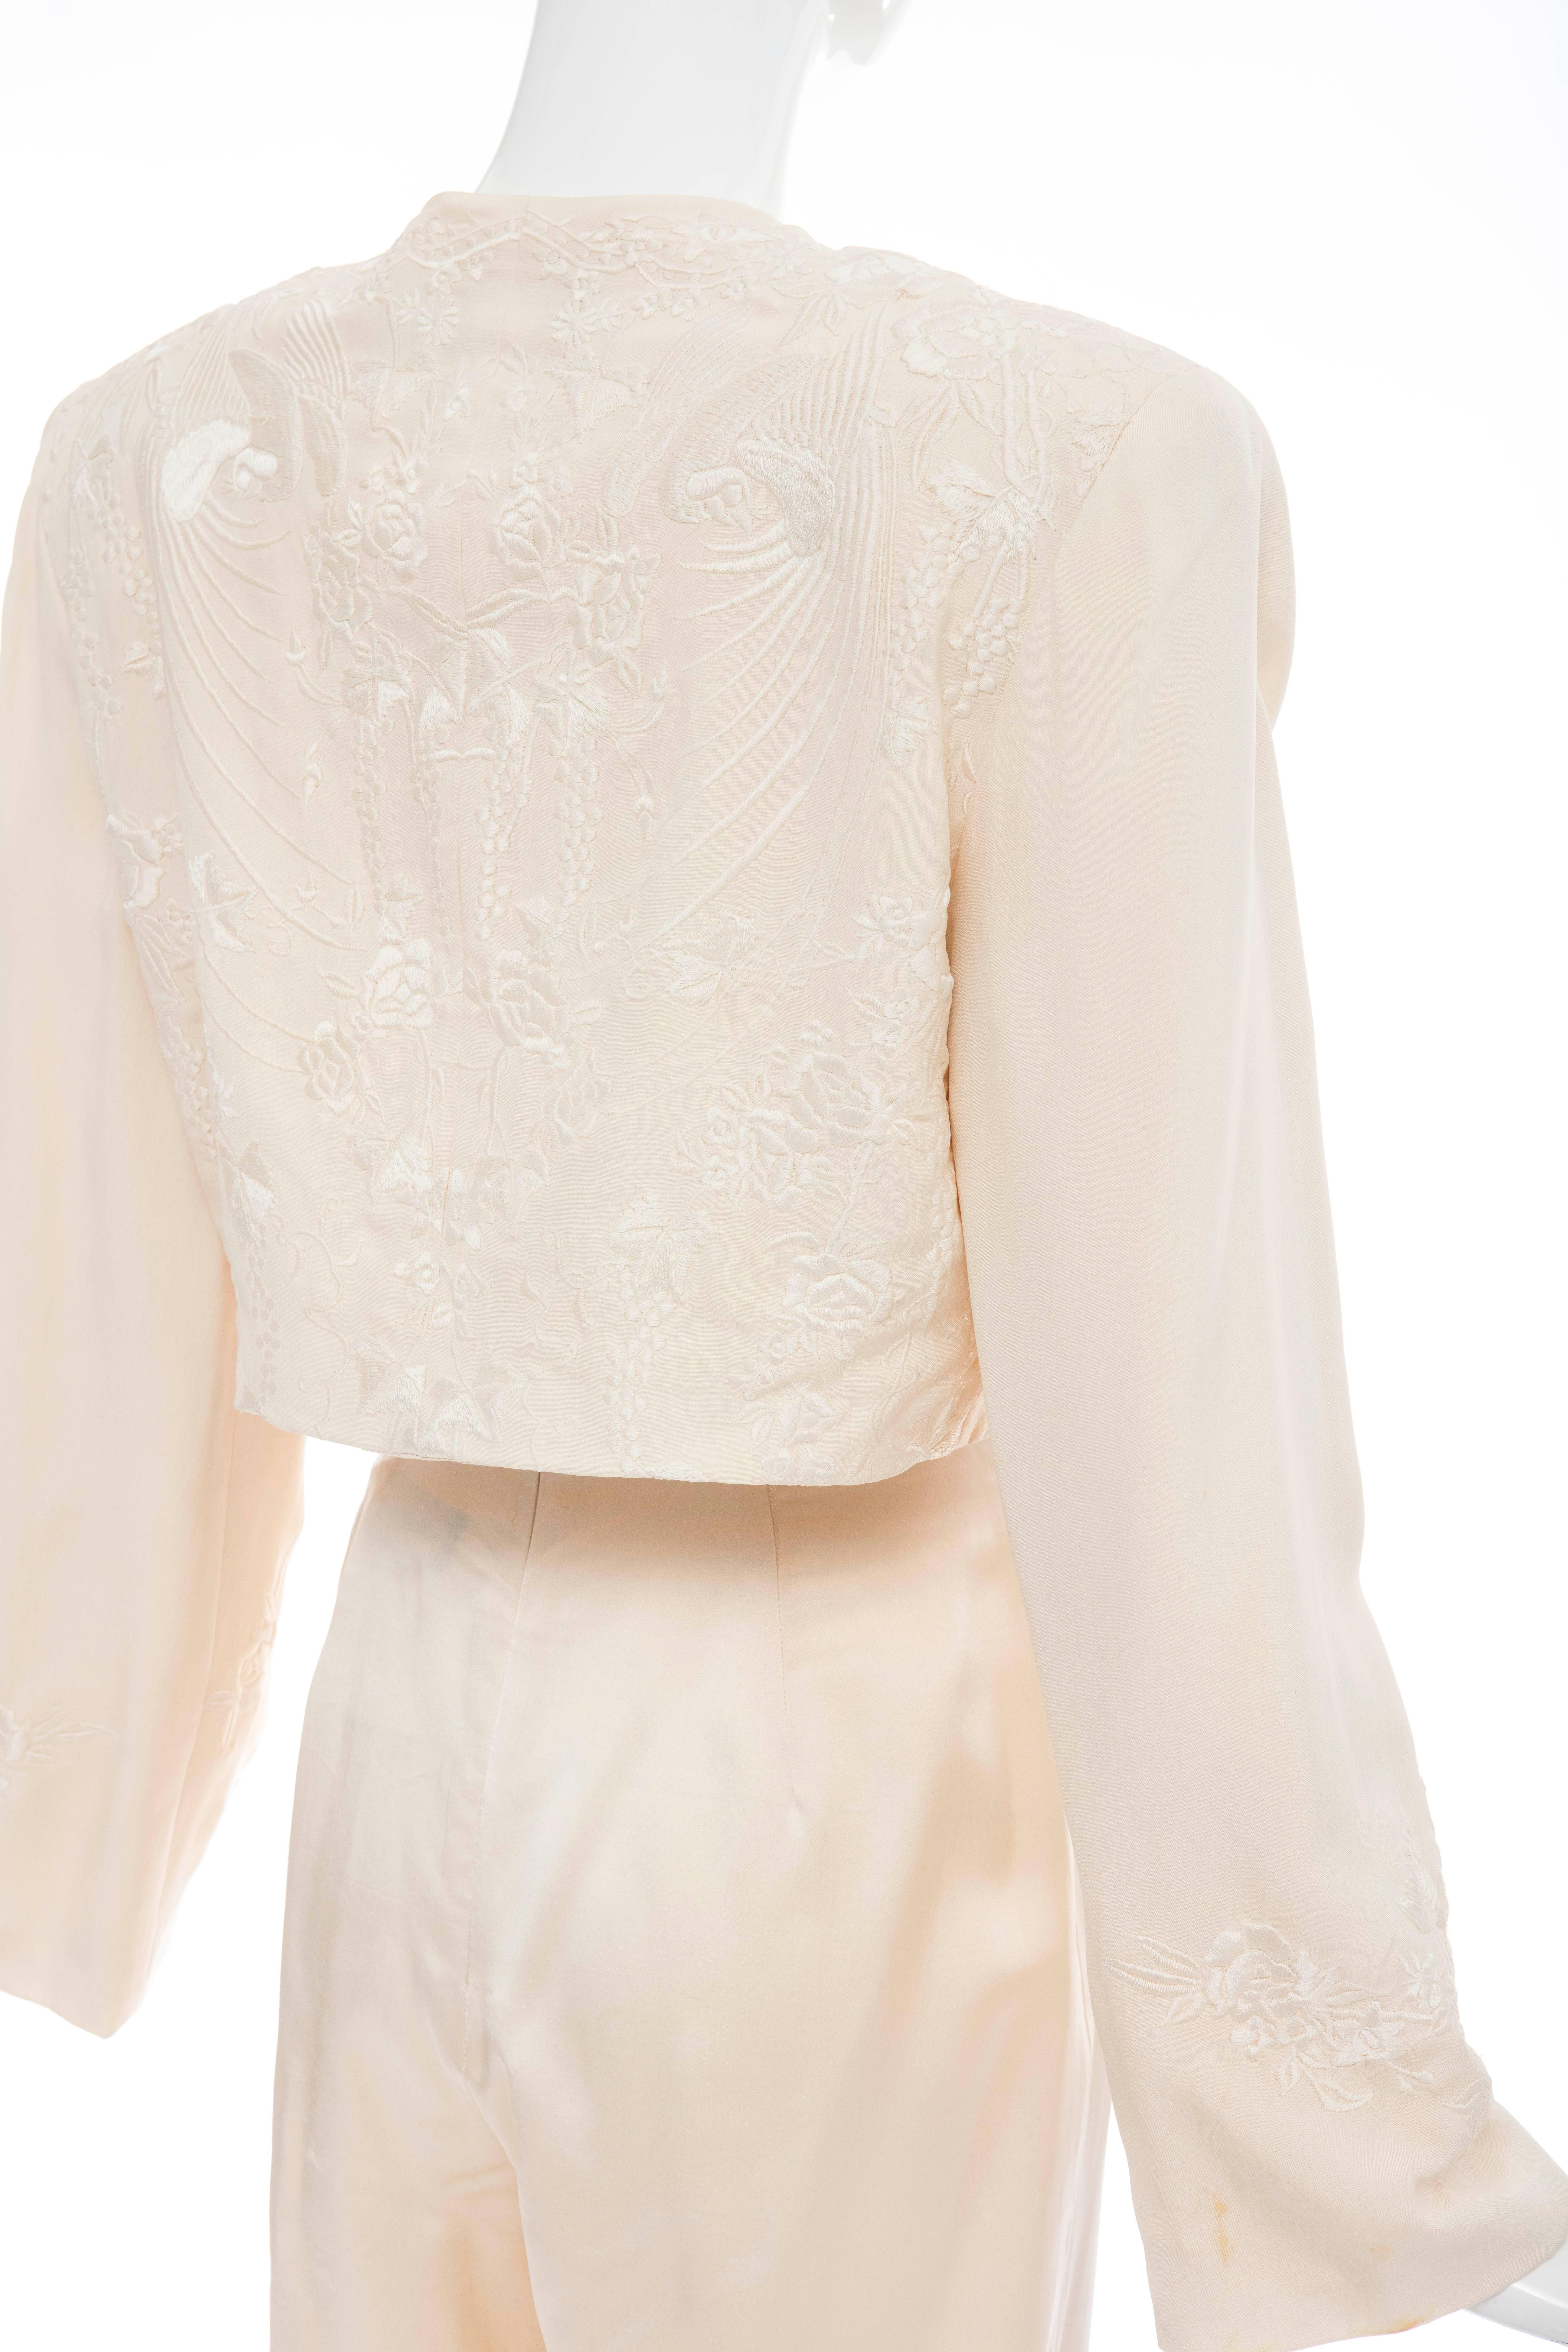 Donna Karan Cream Silk Embroidered Pant Suit, Circa 1980's For Sale 2